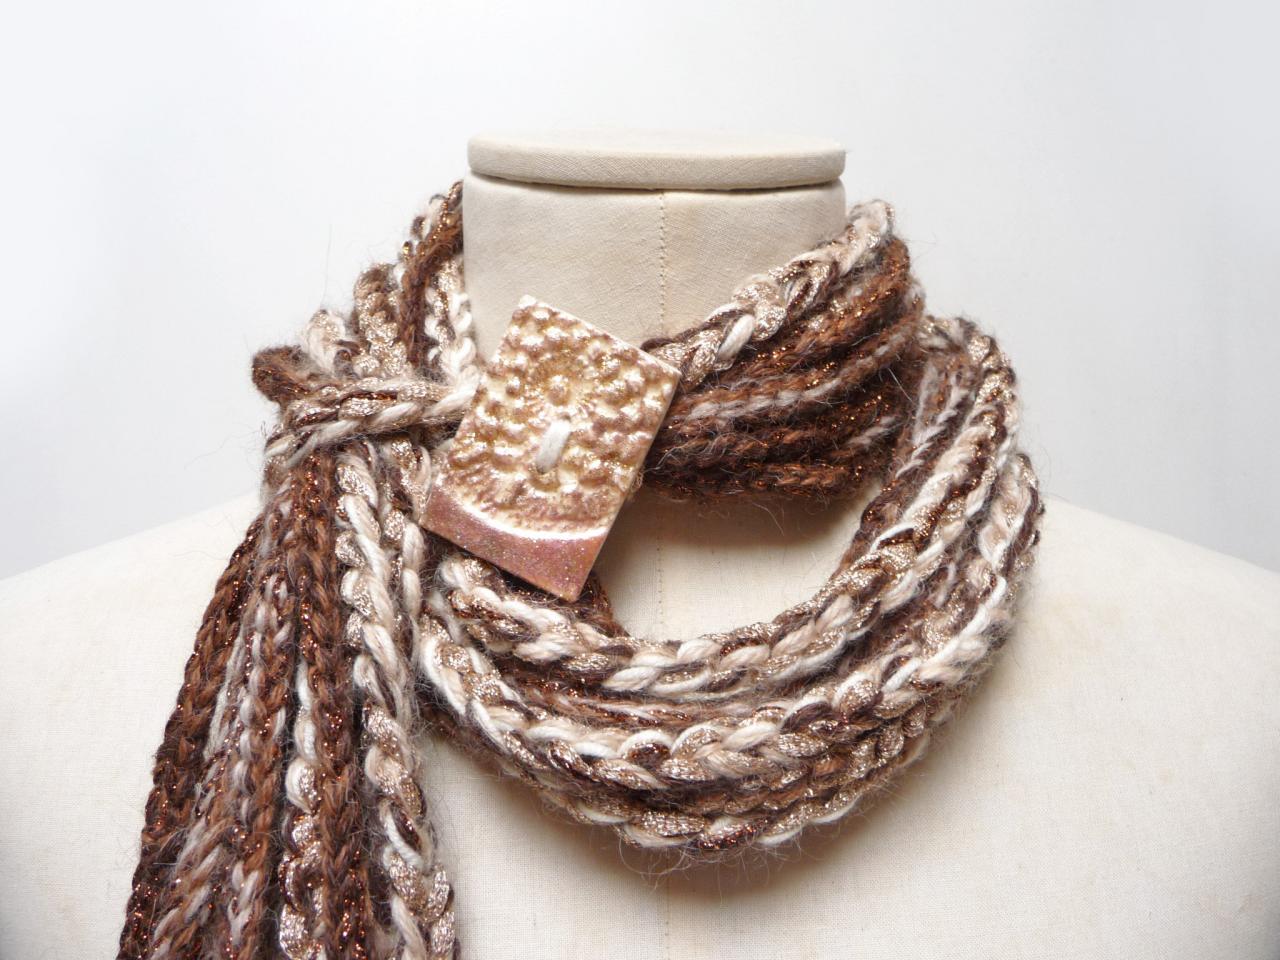 Loop Wool Scarf Necklace, Infinity Crochet Neckwarmer - Brown Gold Copper And Cream White Yarn With Giant Clay Handmade Button, Hygge Scarf